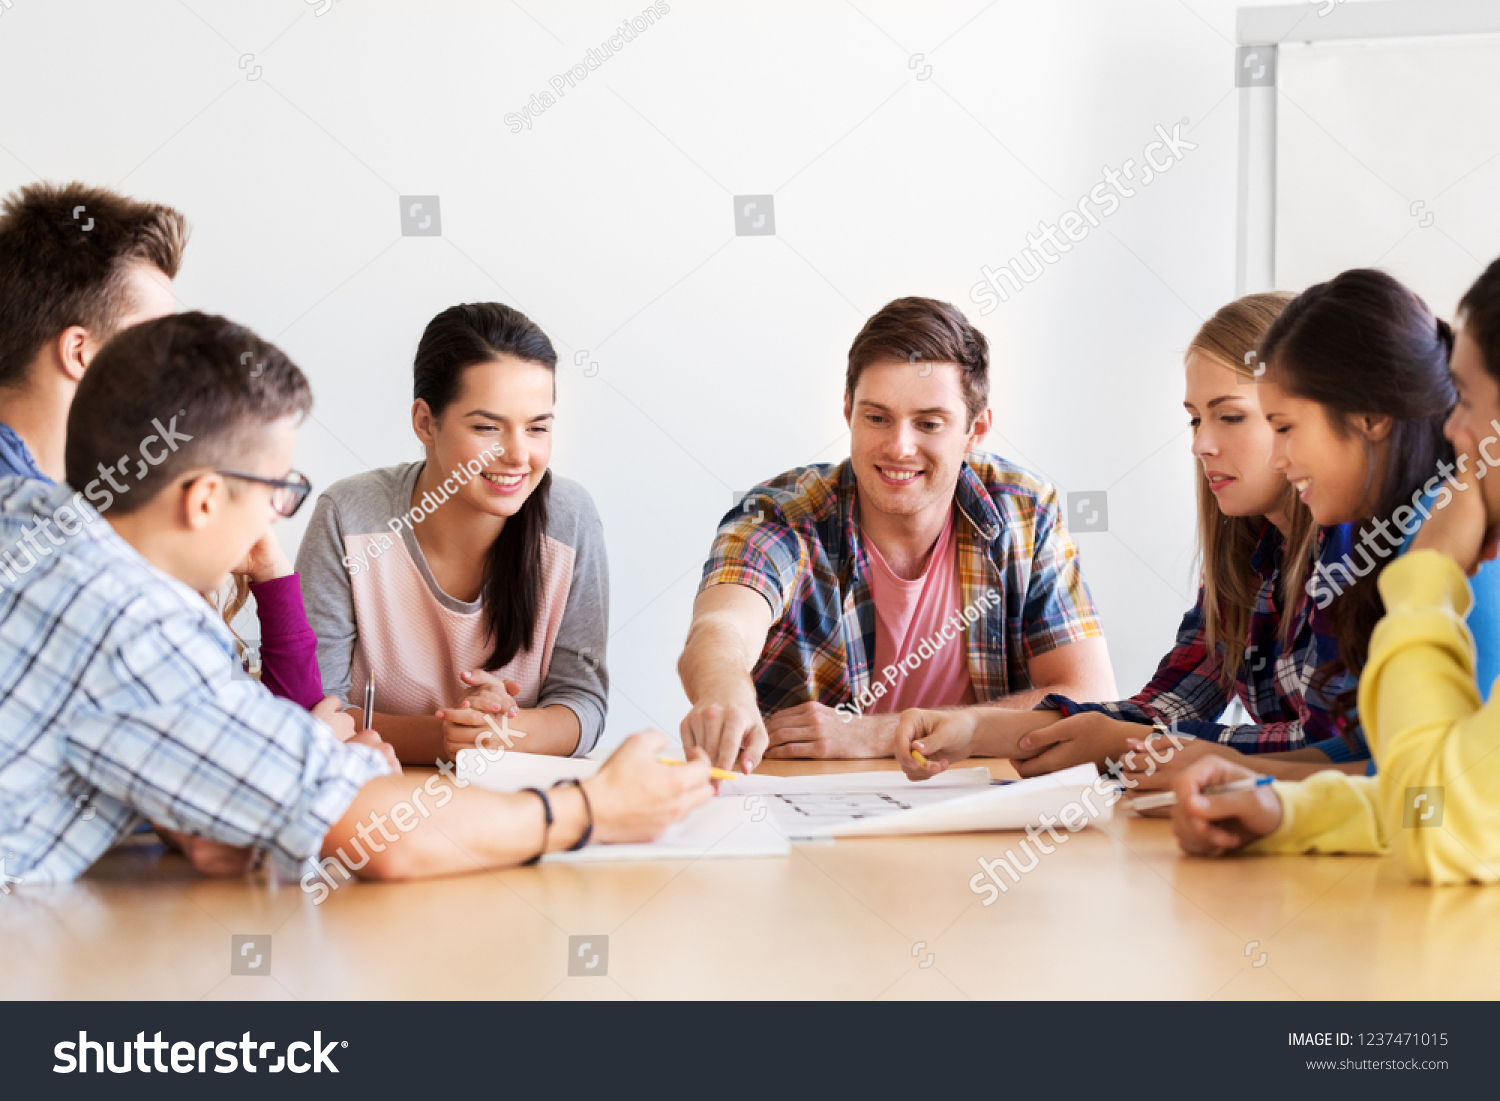 education, architecture and people concept - group of smiling students meeting at school #1237471015